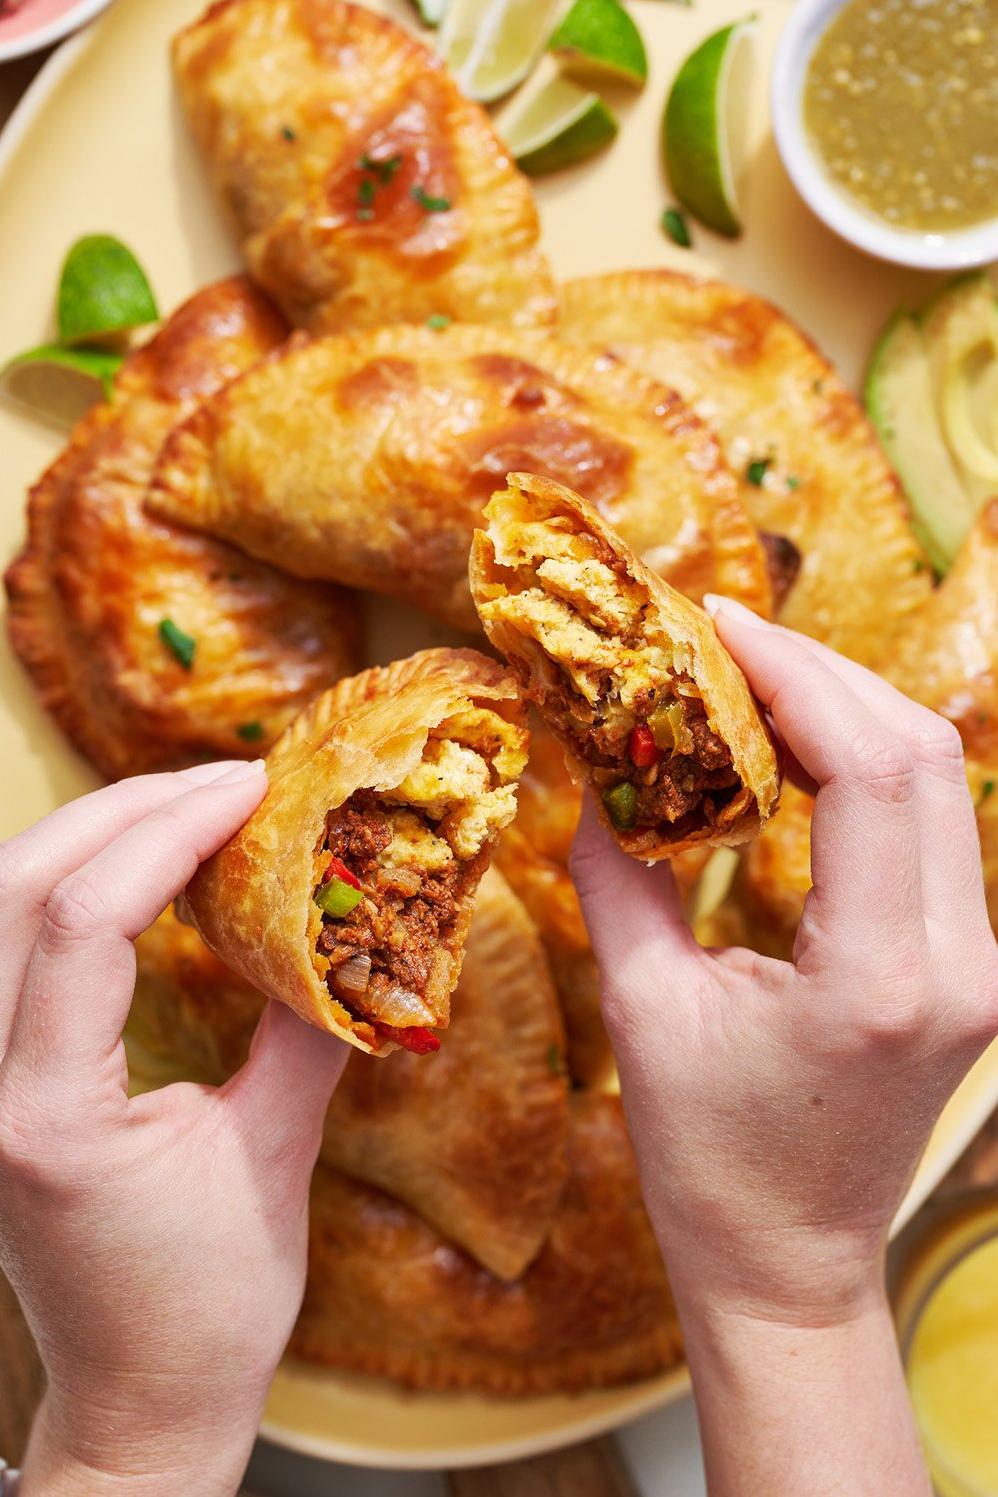  Delicious empanadas with a golden, flaky crust and savory filling.